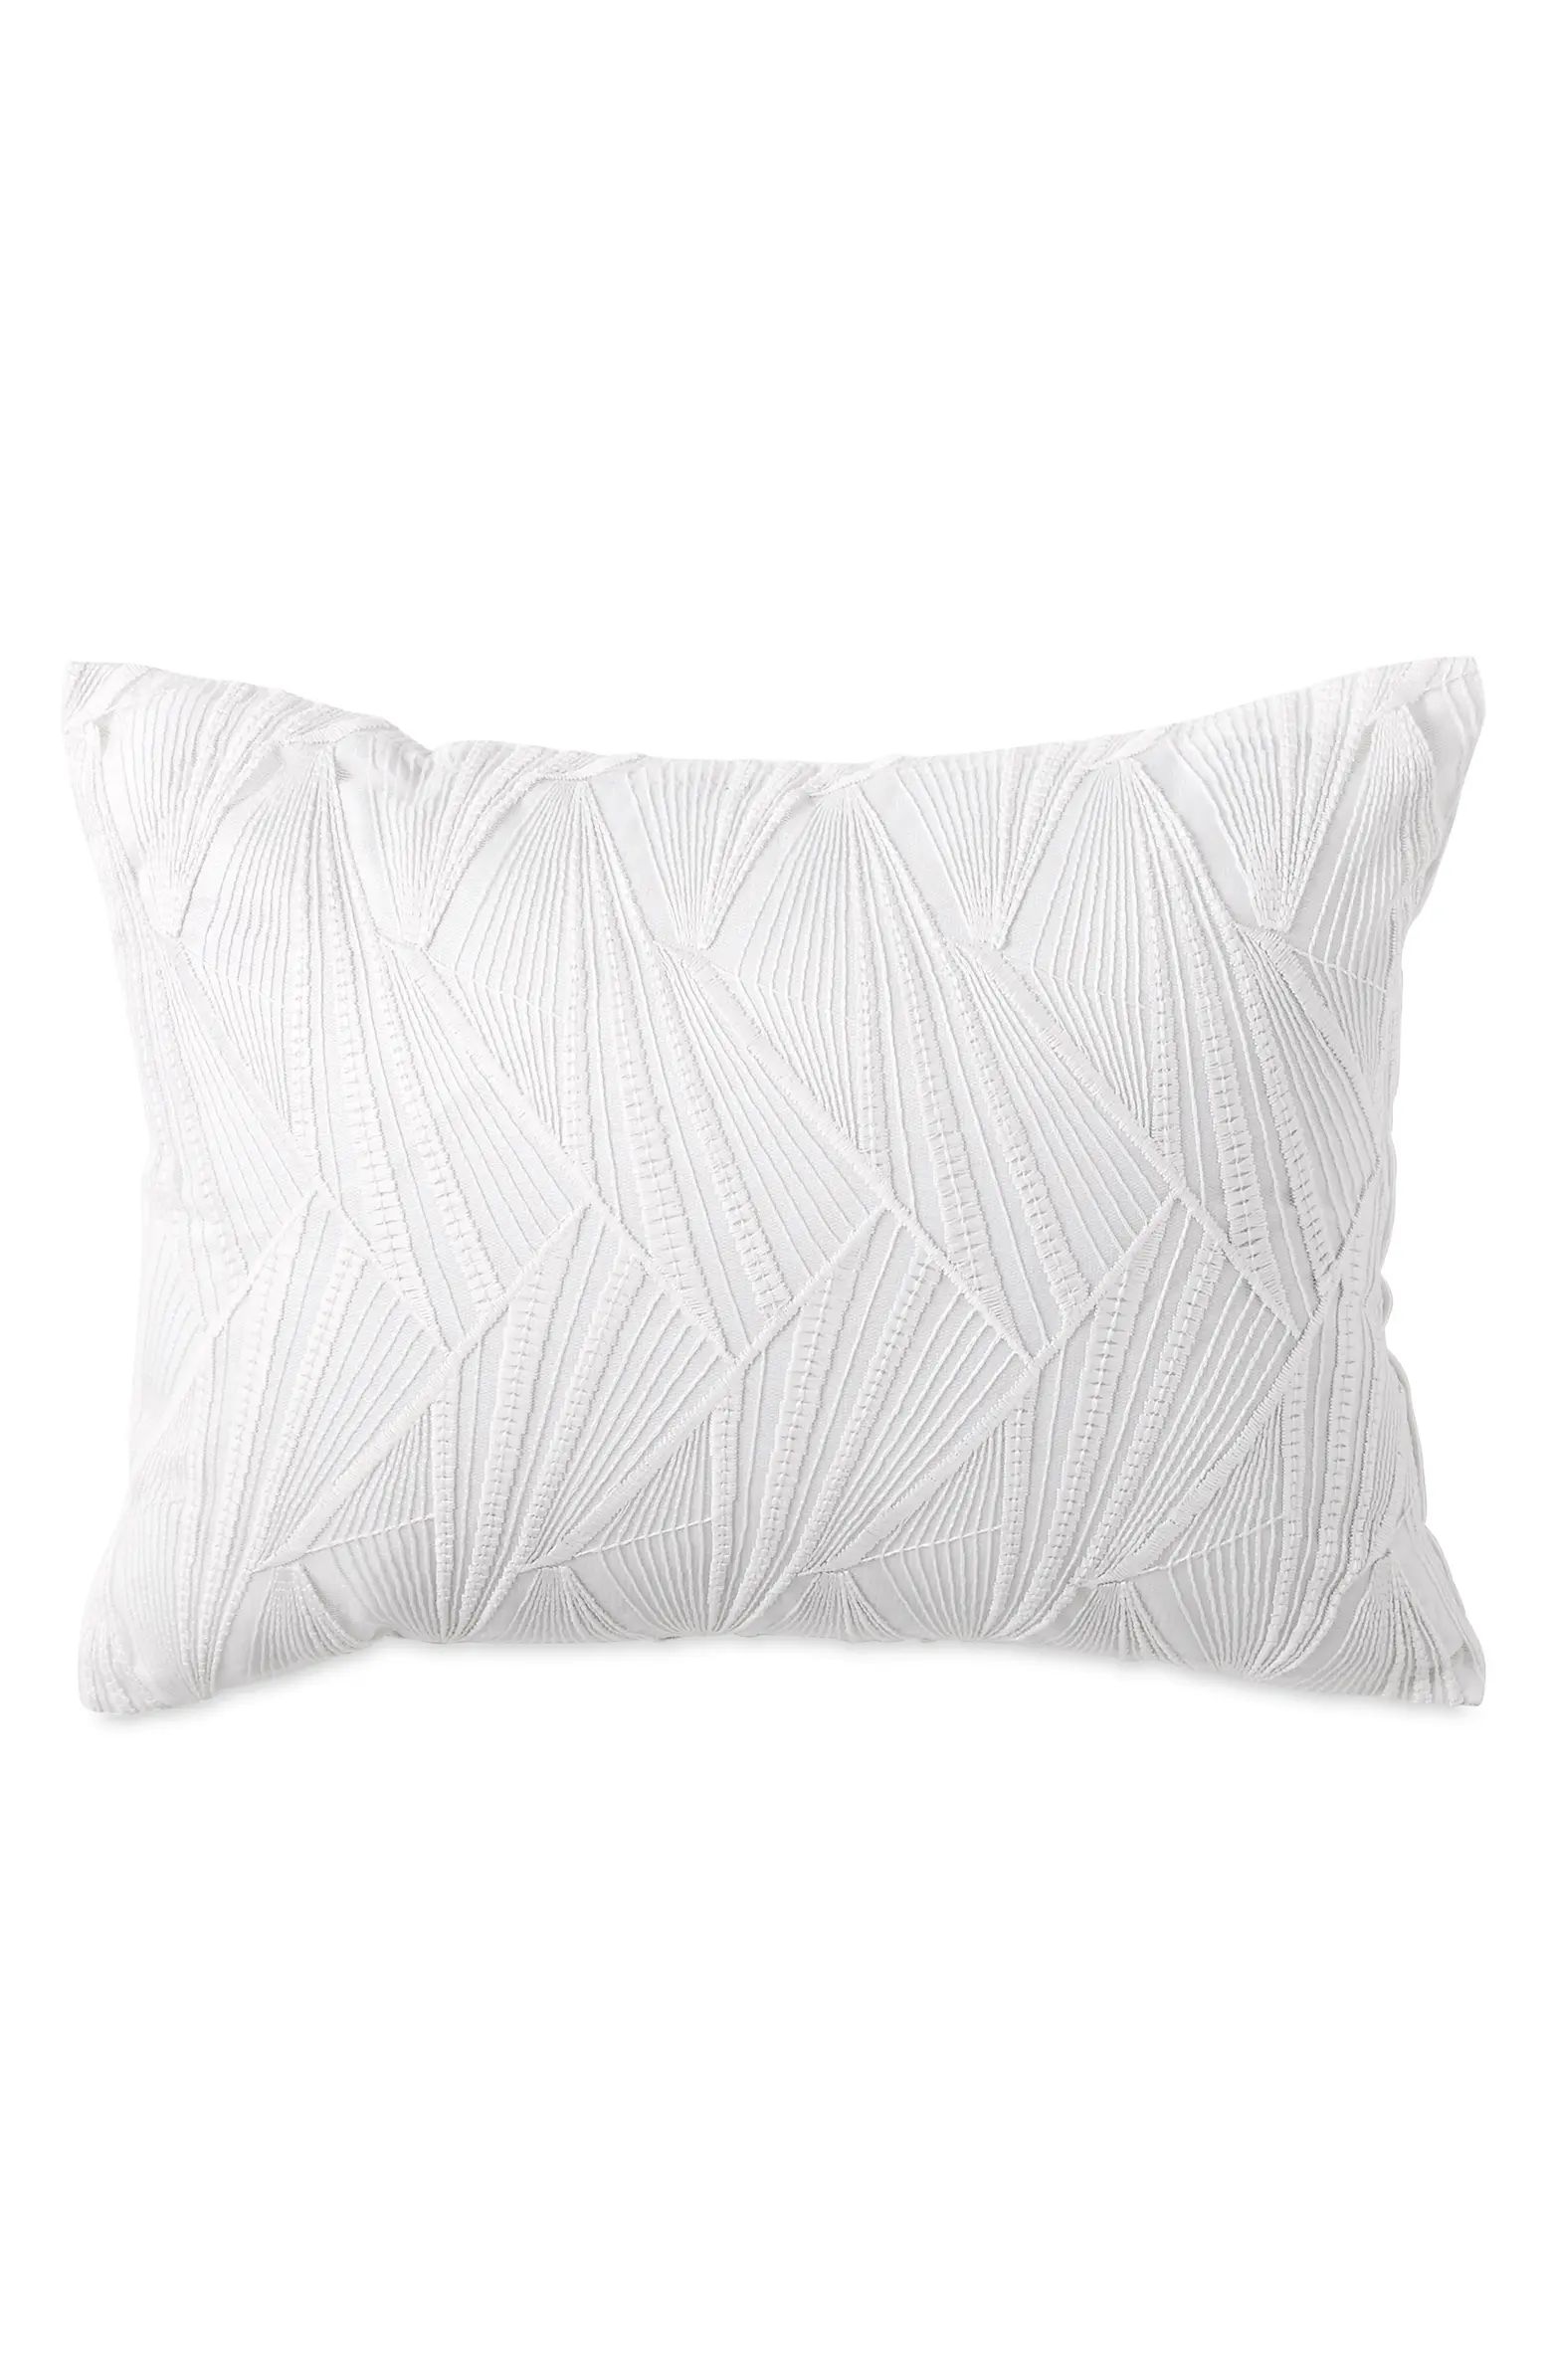 Textured Accent Pillow | Nordstrom